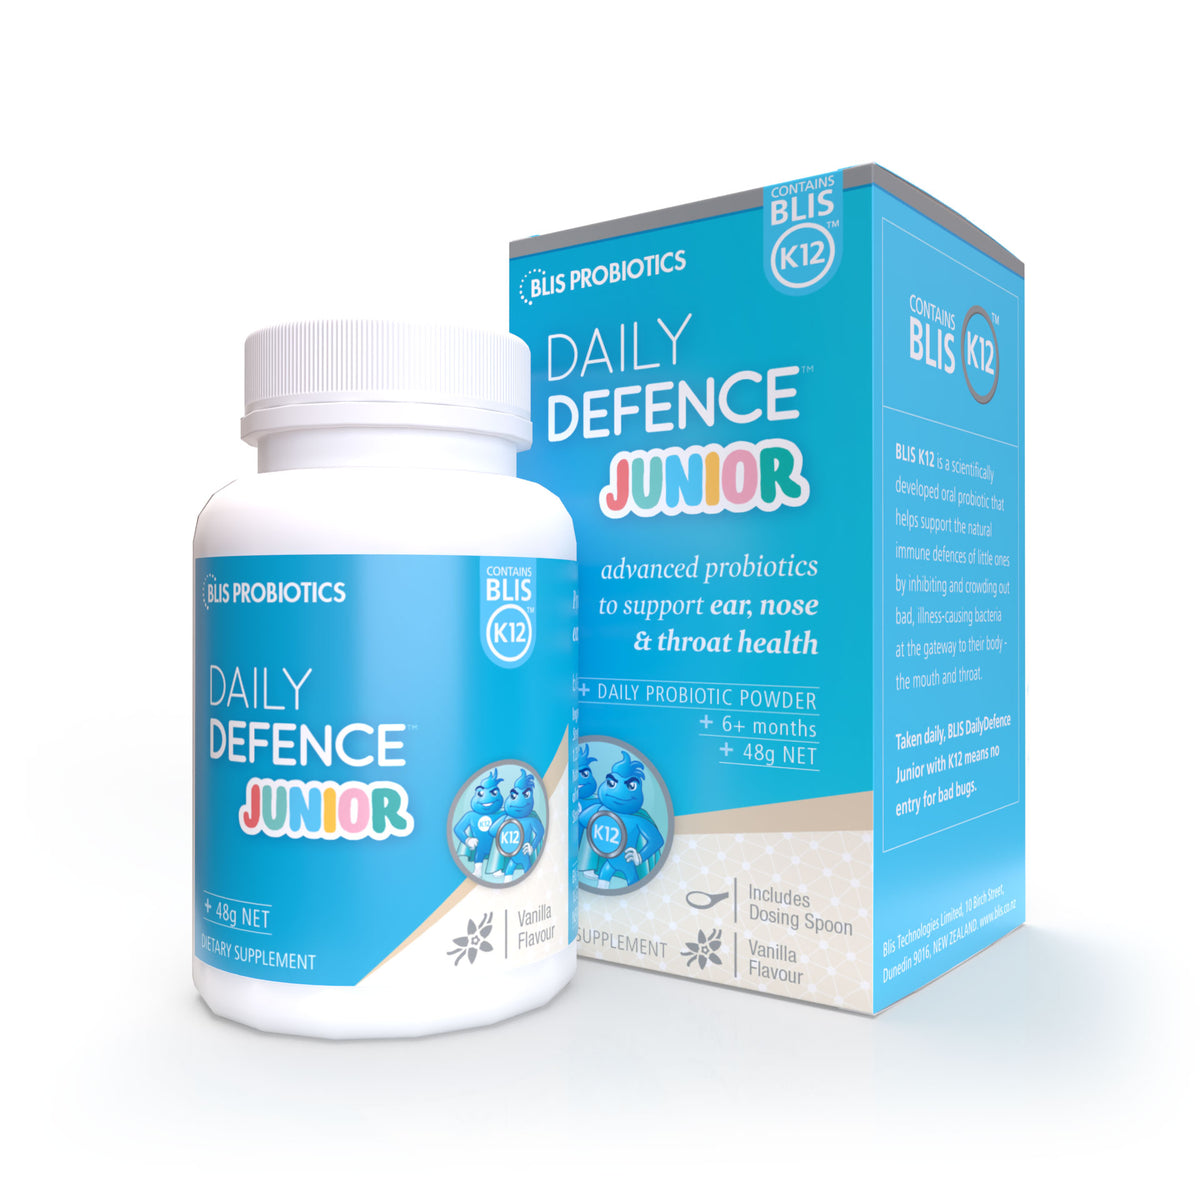 Daily Defence Junior Vanilla Flavour - advanced probiotics to support ear, nose and throat health